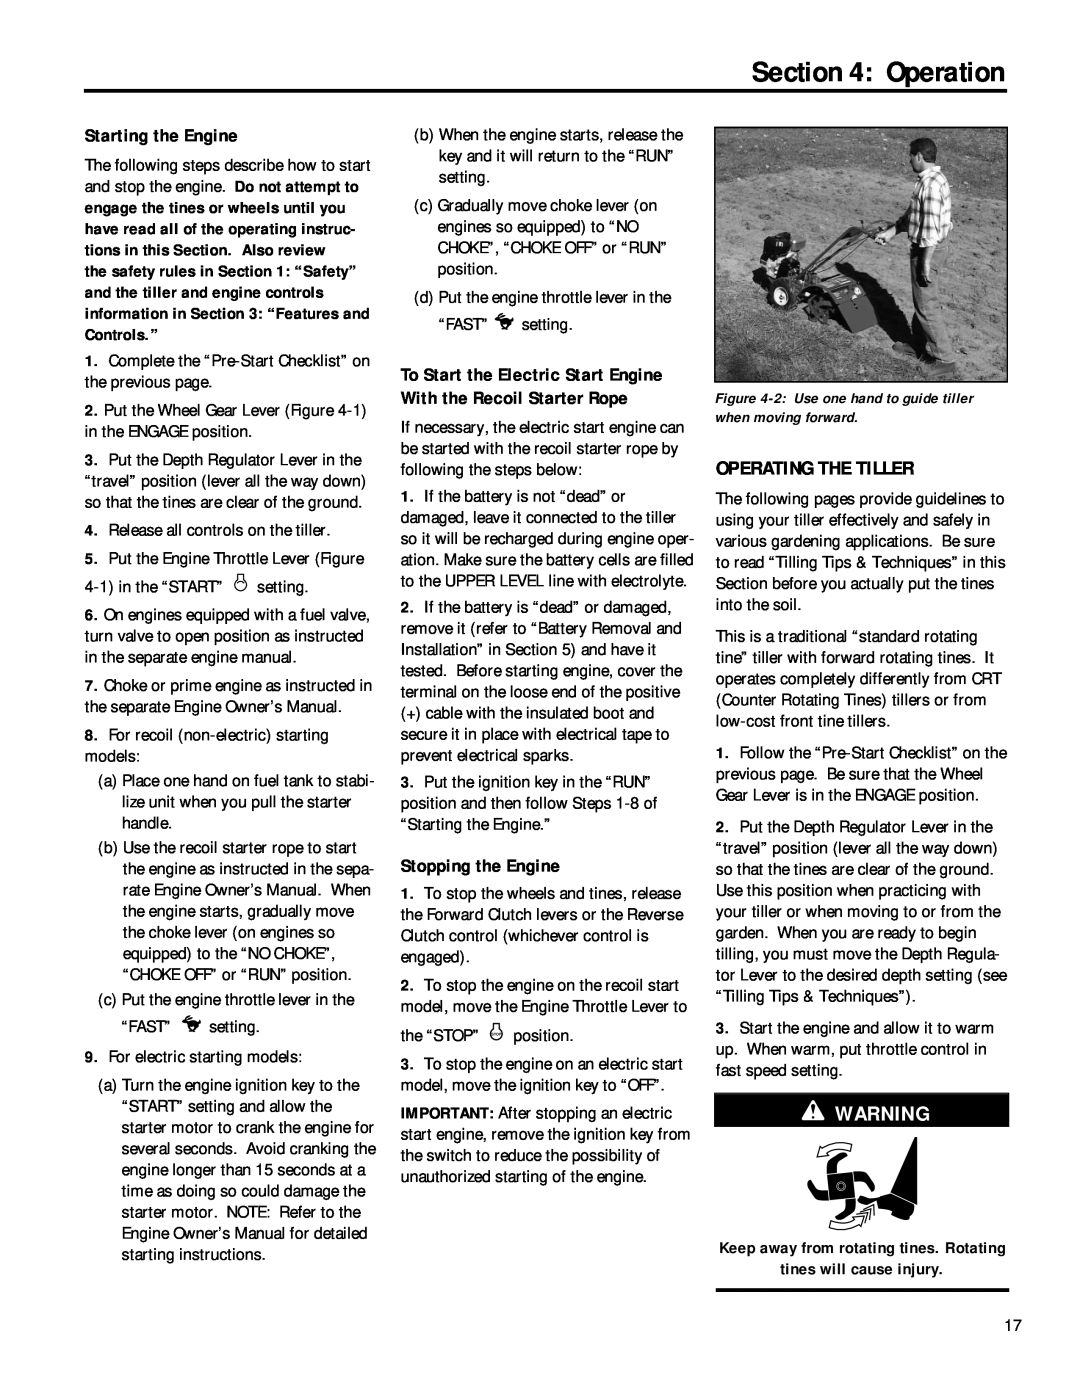 Troy-Bilt 12211, 12212 owner manual Operation, Operating The Tiller, Starting the Engine, Stopping the Engine 